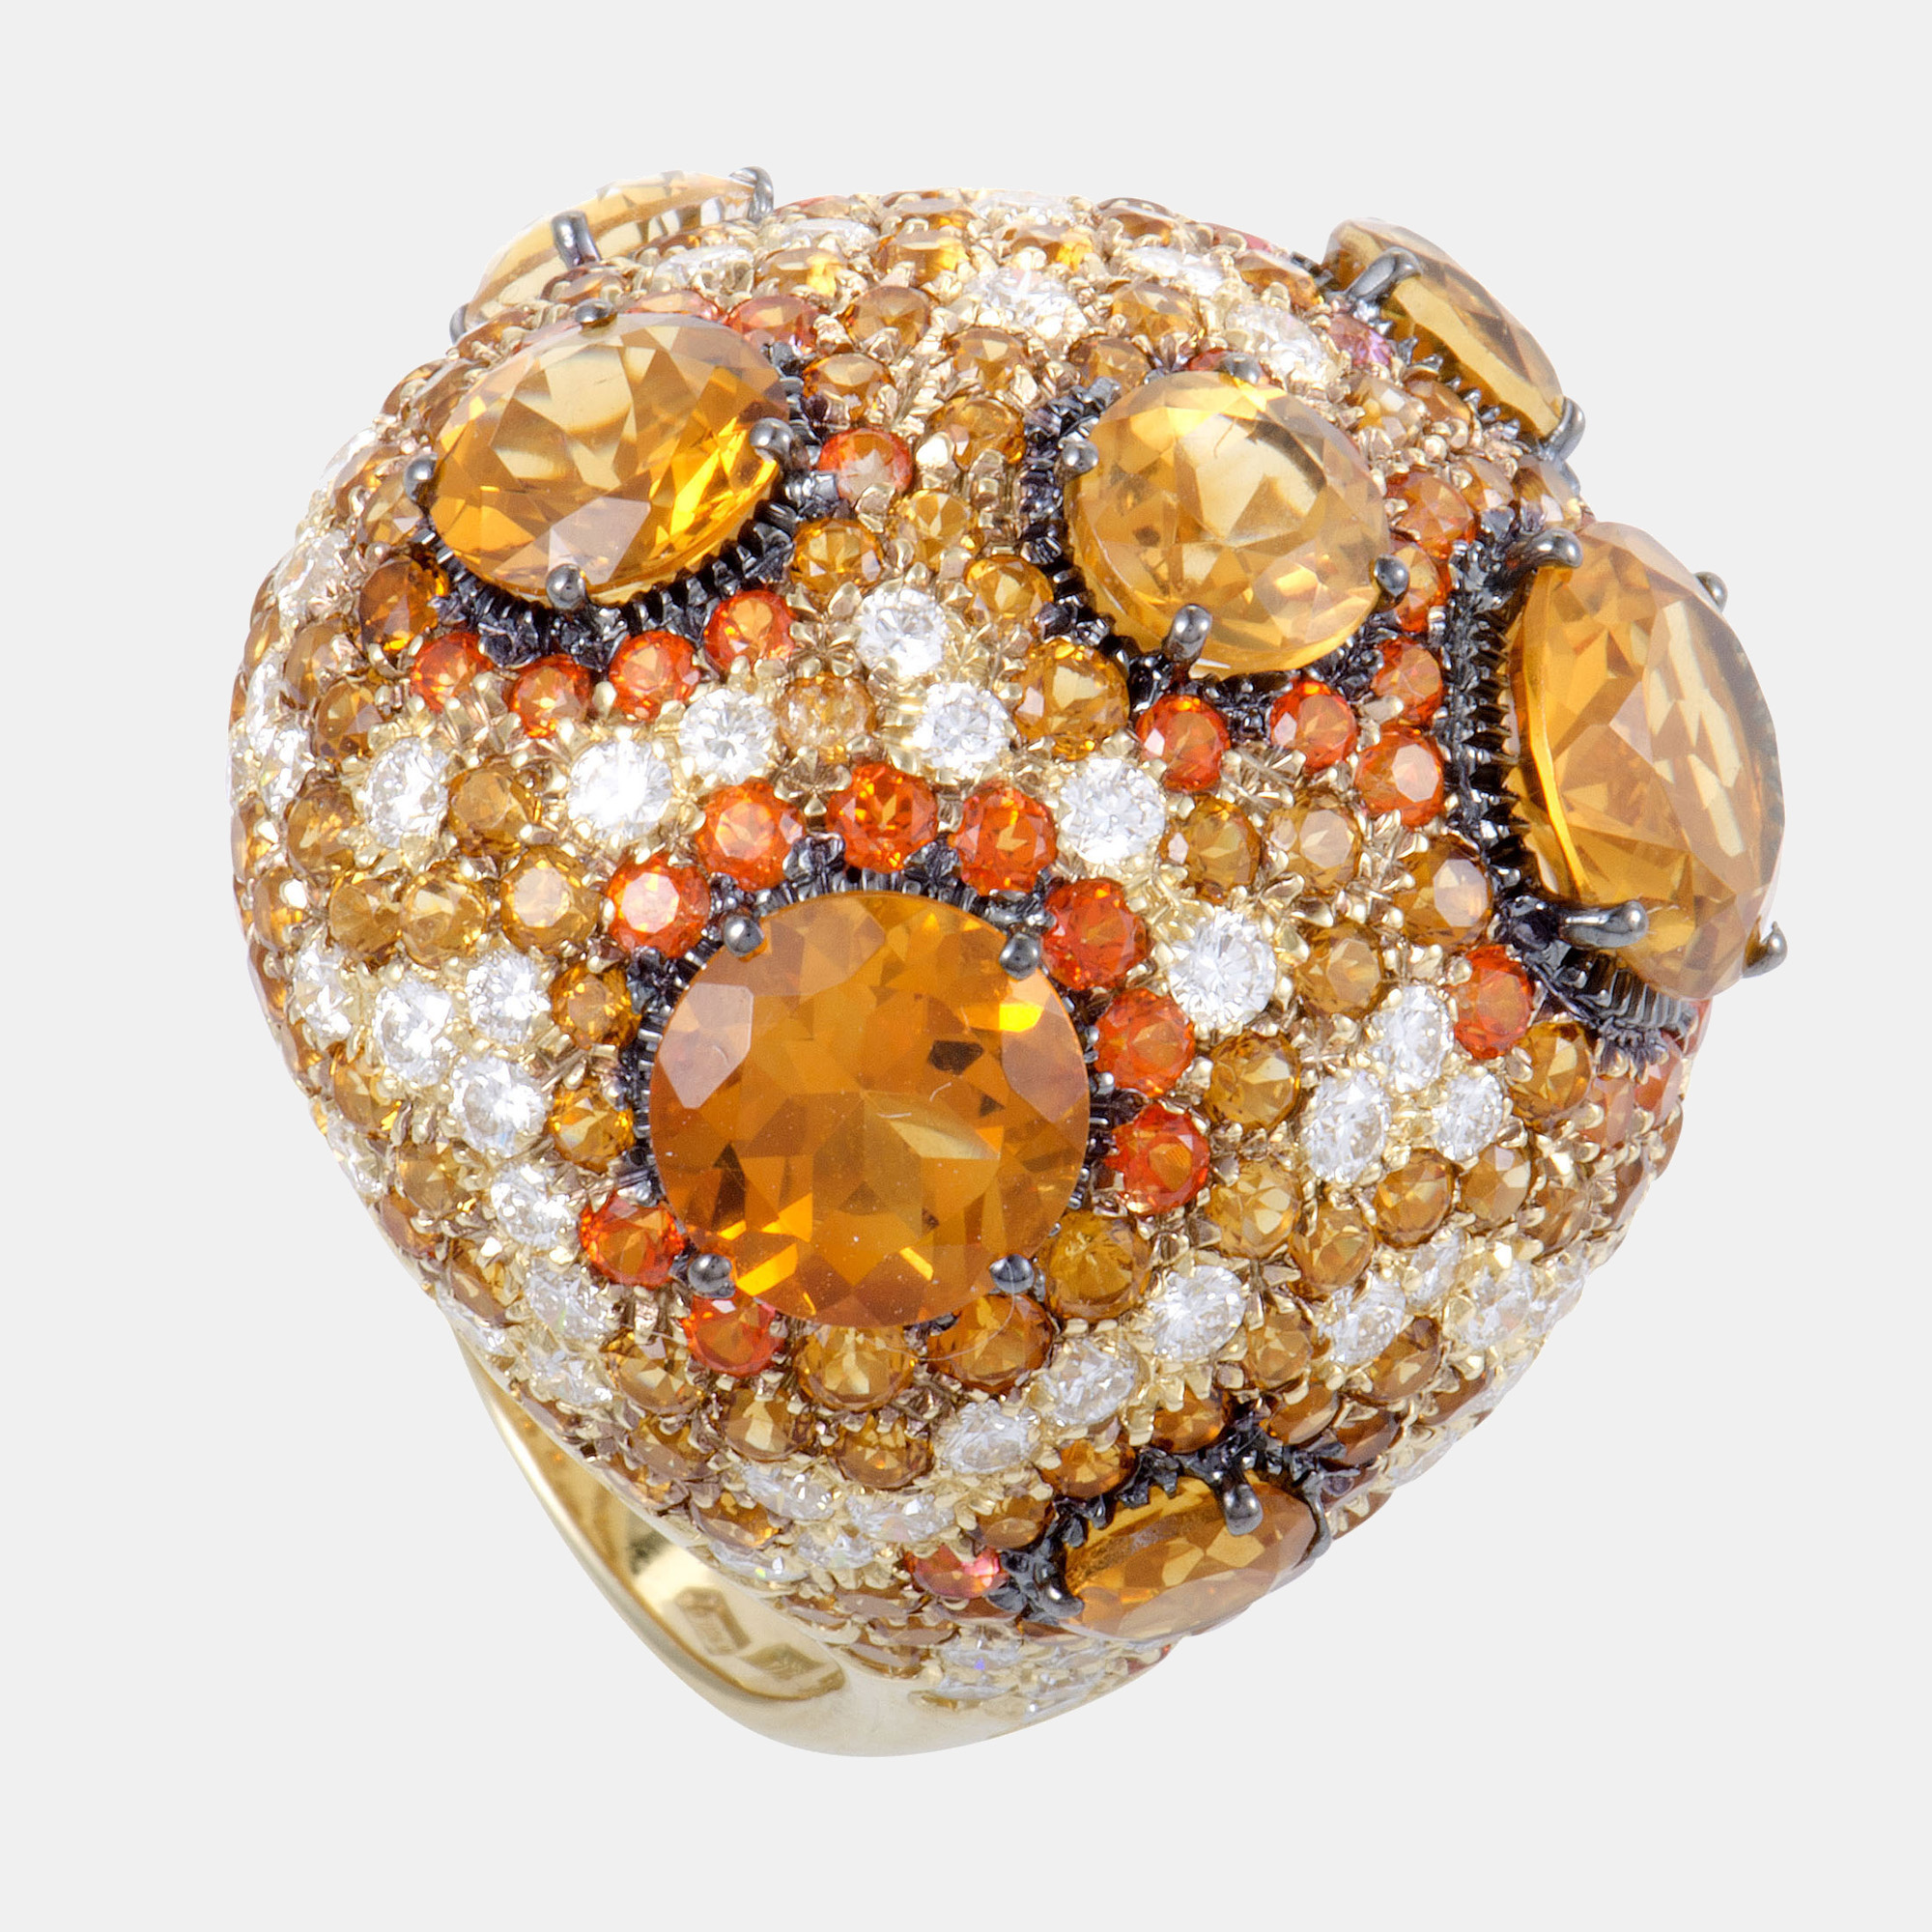 Mesmerizing flamboyant and certainly memorable the majestic design of this astonishing ring from Roberto Coin is executed to perfection with partially black rhodium plated 18K yellow gold hosting a spellbinding blend of glistening diamonds totaling 2.70 carats orange topaz stones amounting to 0.42ct and fabulous orange citrine stones weighing in total 11.50 carats. Ring Top Dimensions 30 x 30mm